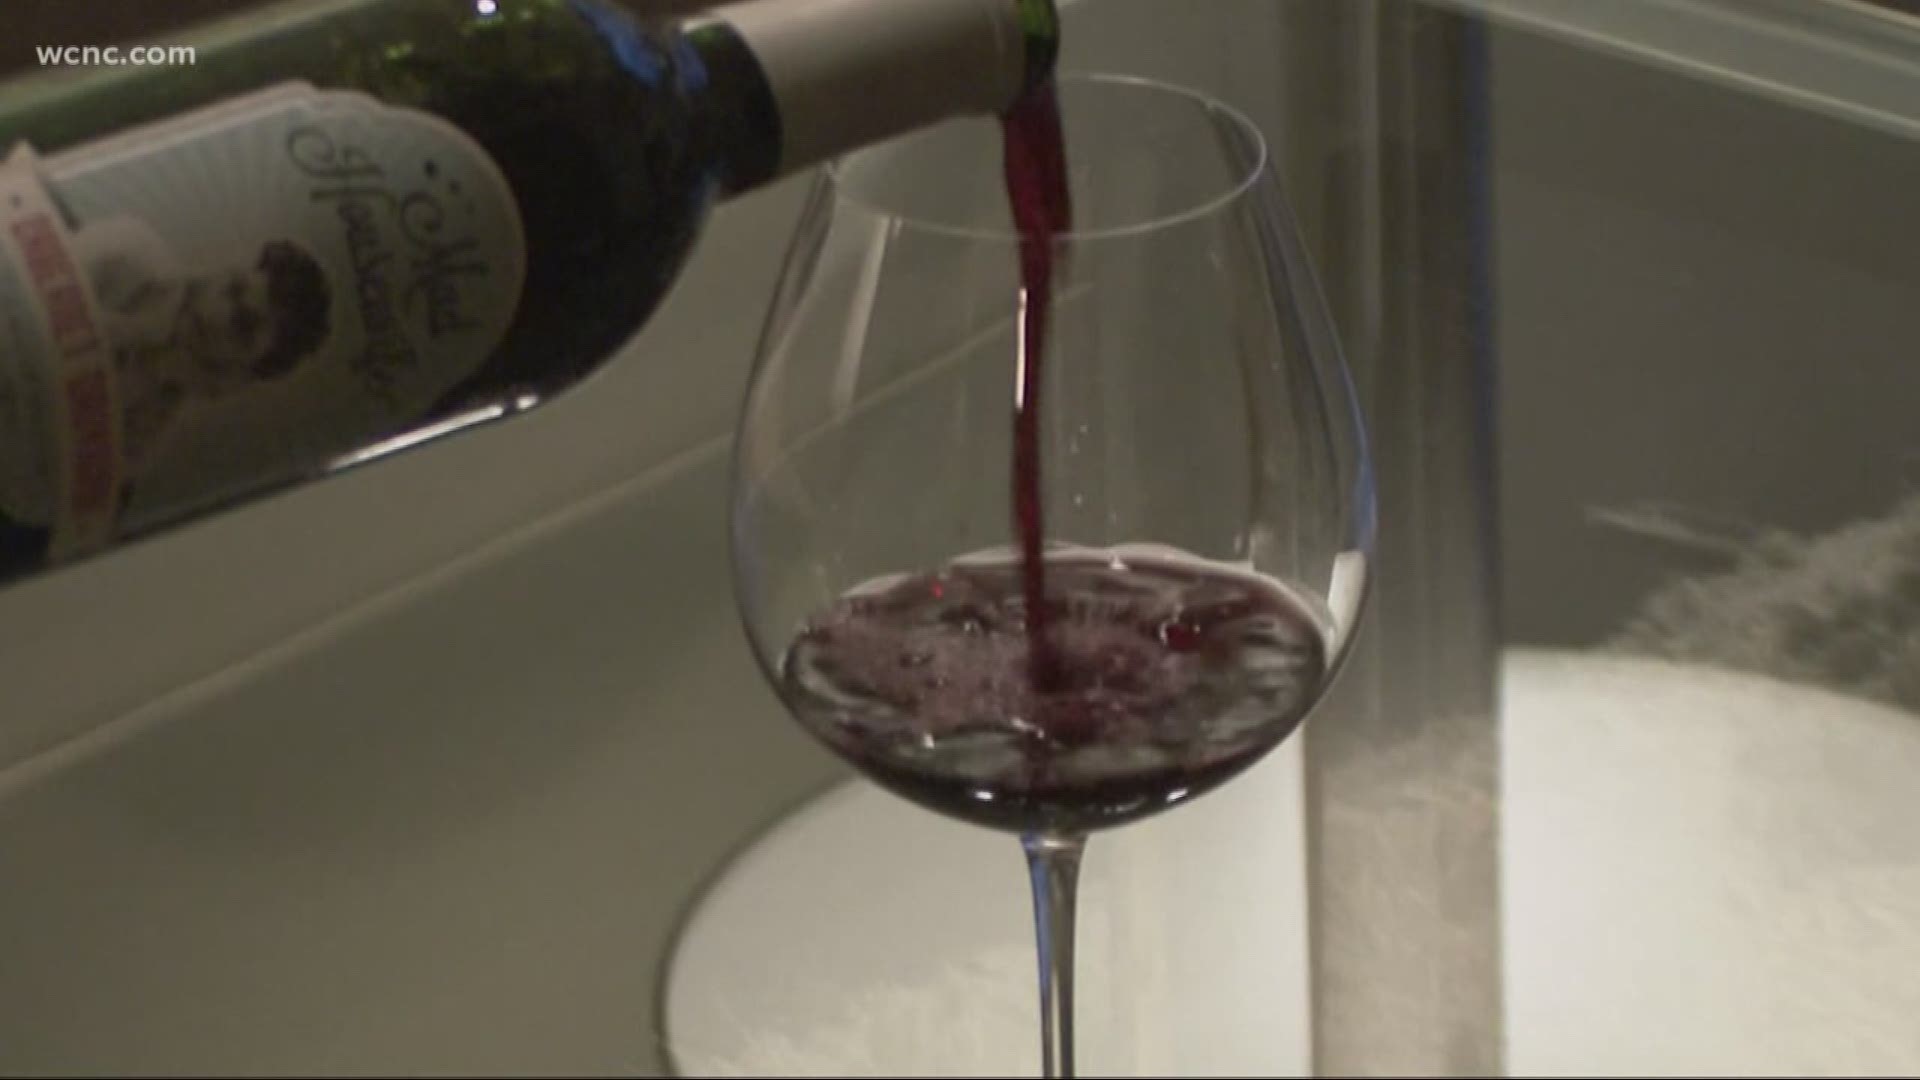 Looking for a reason to have a second glass of wine? Researchers say wine can kill germs that cause sore throats and dental plaque.